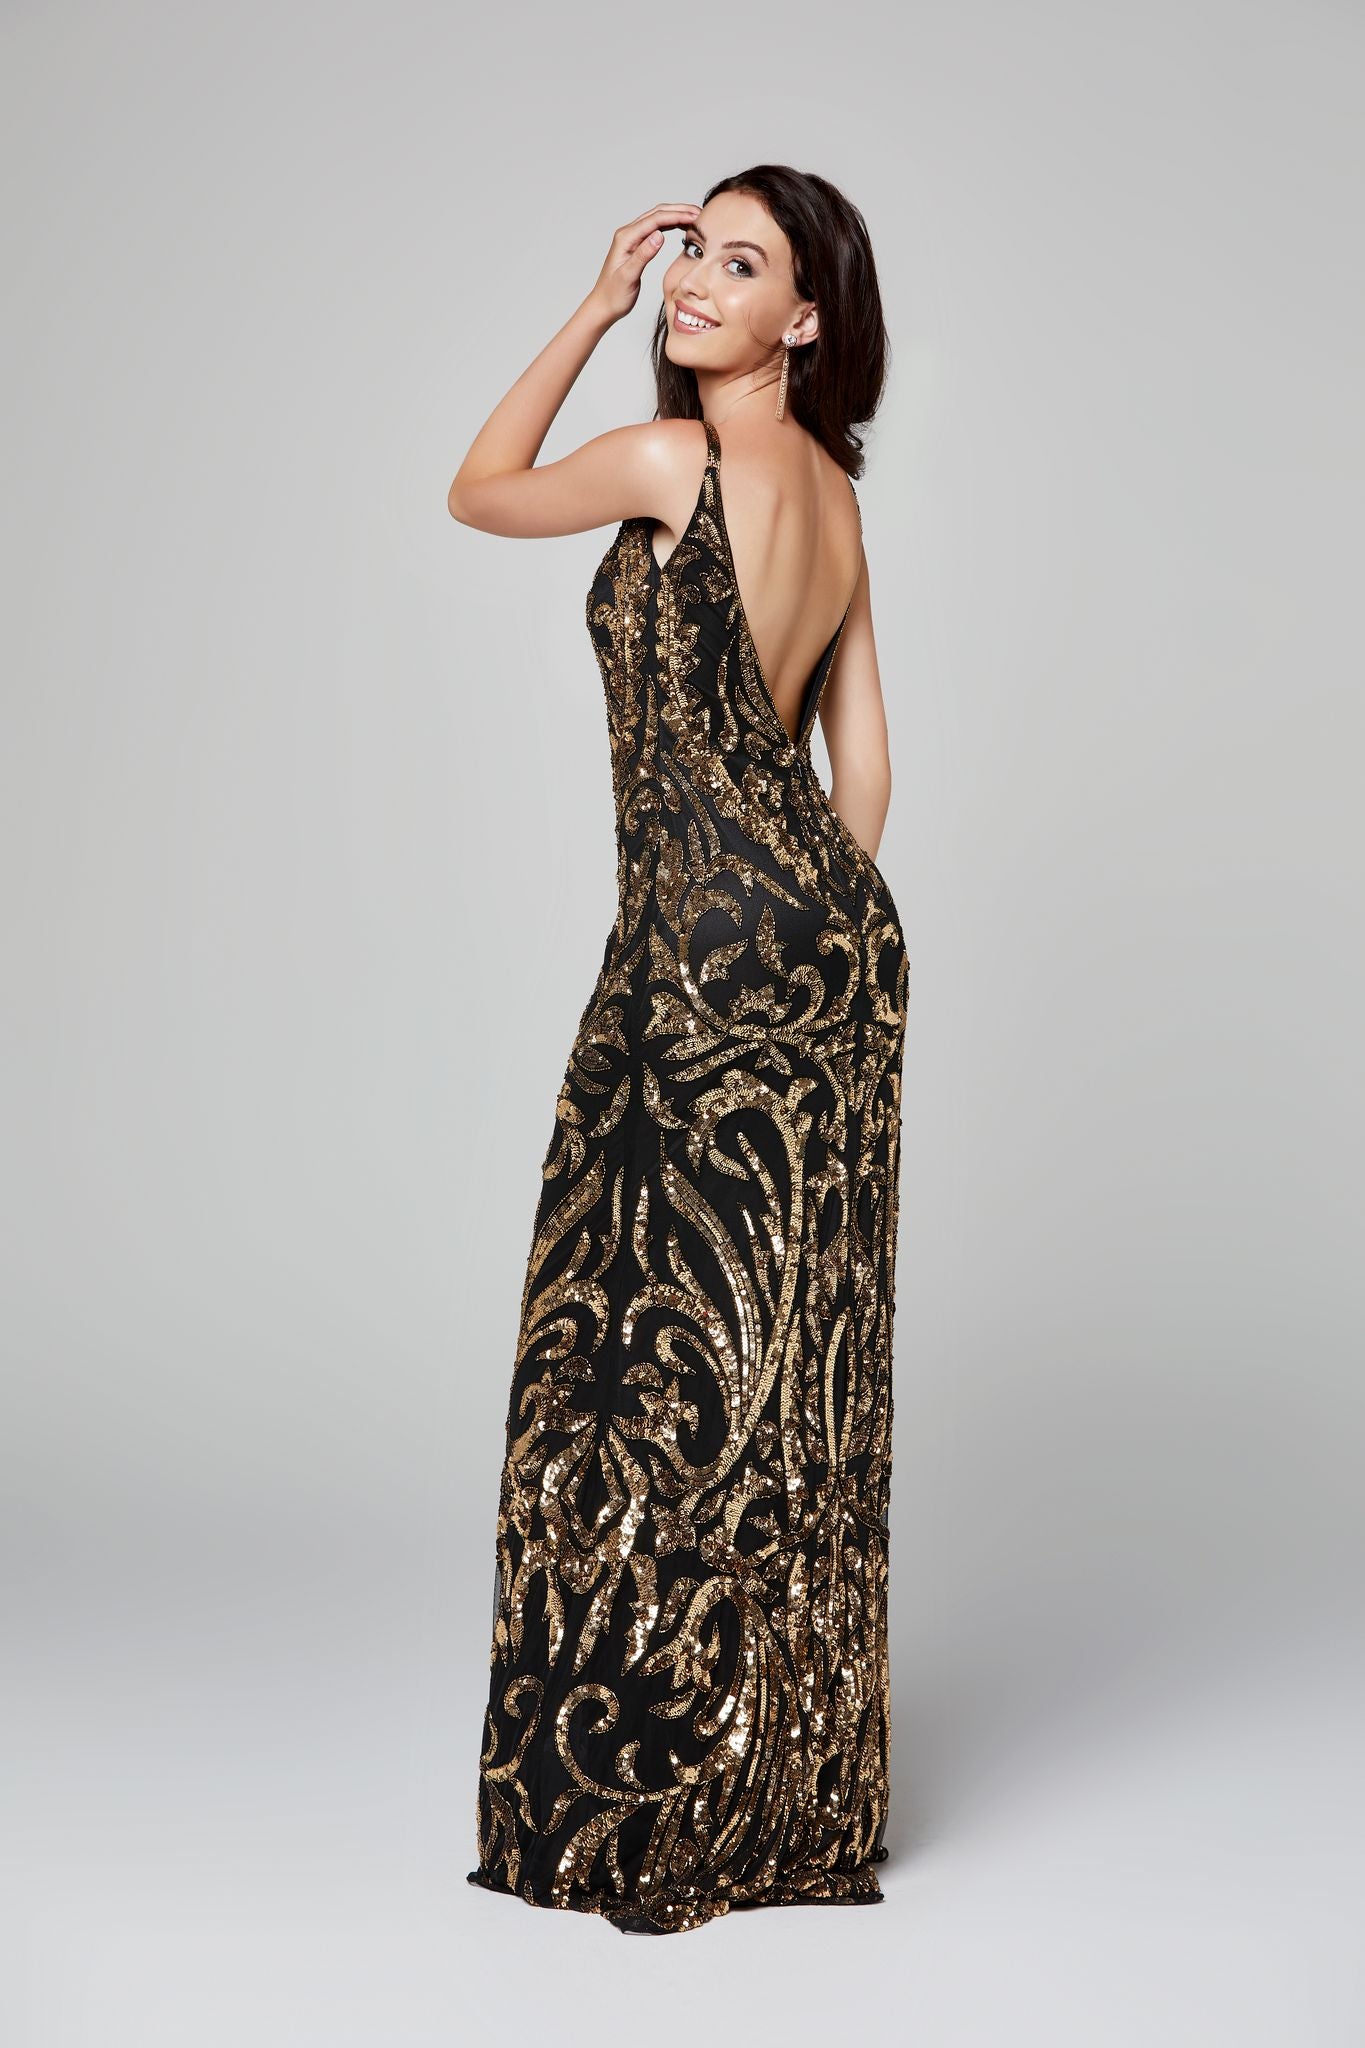 Primavera Couture 3454 is a Beaded Sequins Designer Prom, Pageant & Formal Dress. Featuring a Plunging V neckline with mesh panel. Embellished sequins & Hand beading along the entire gown in a damask print. Great evening gown. Open scoop back.  Black/Gold  size 8